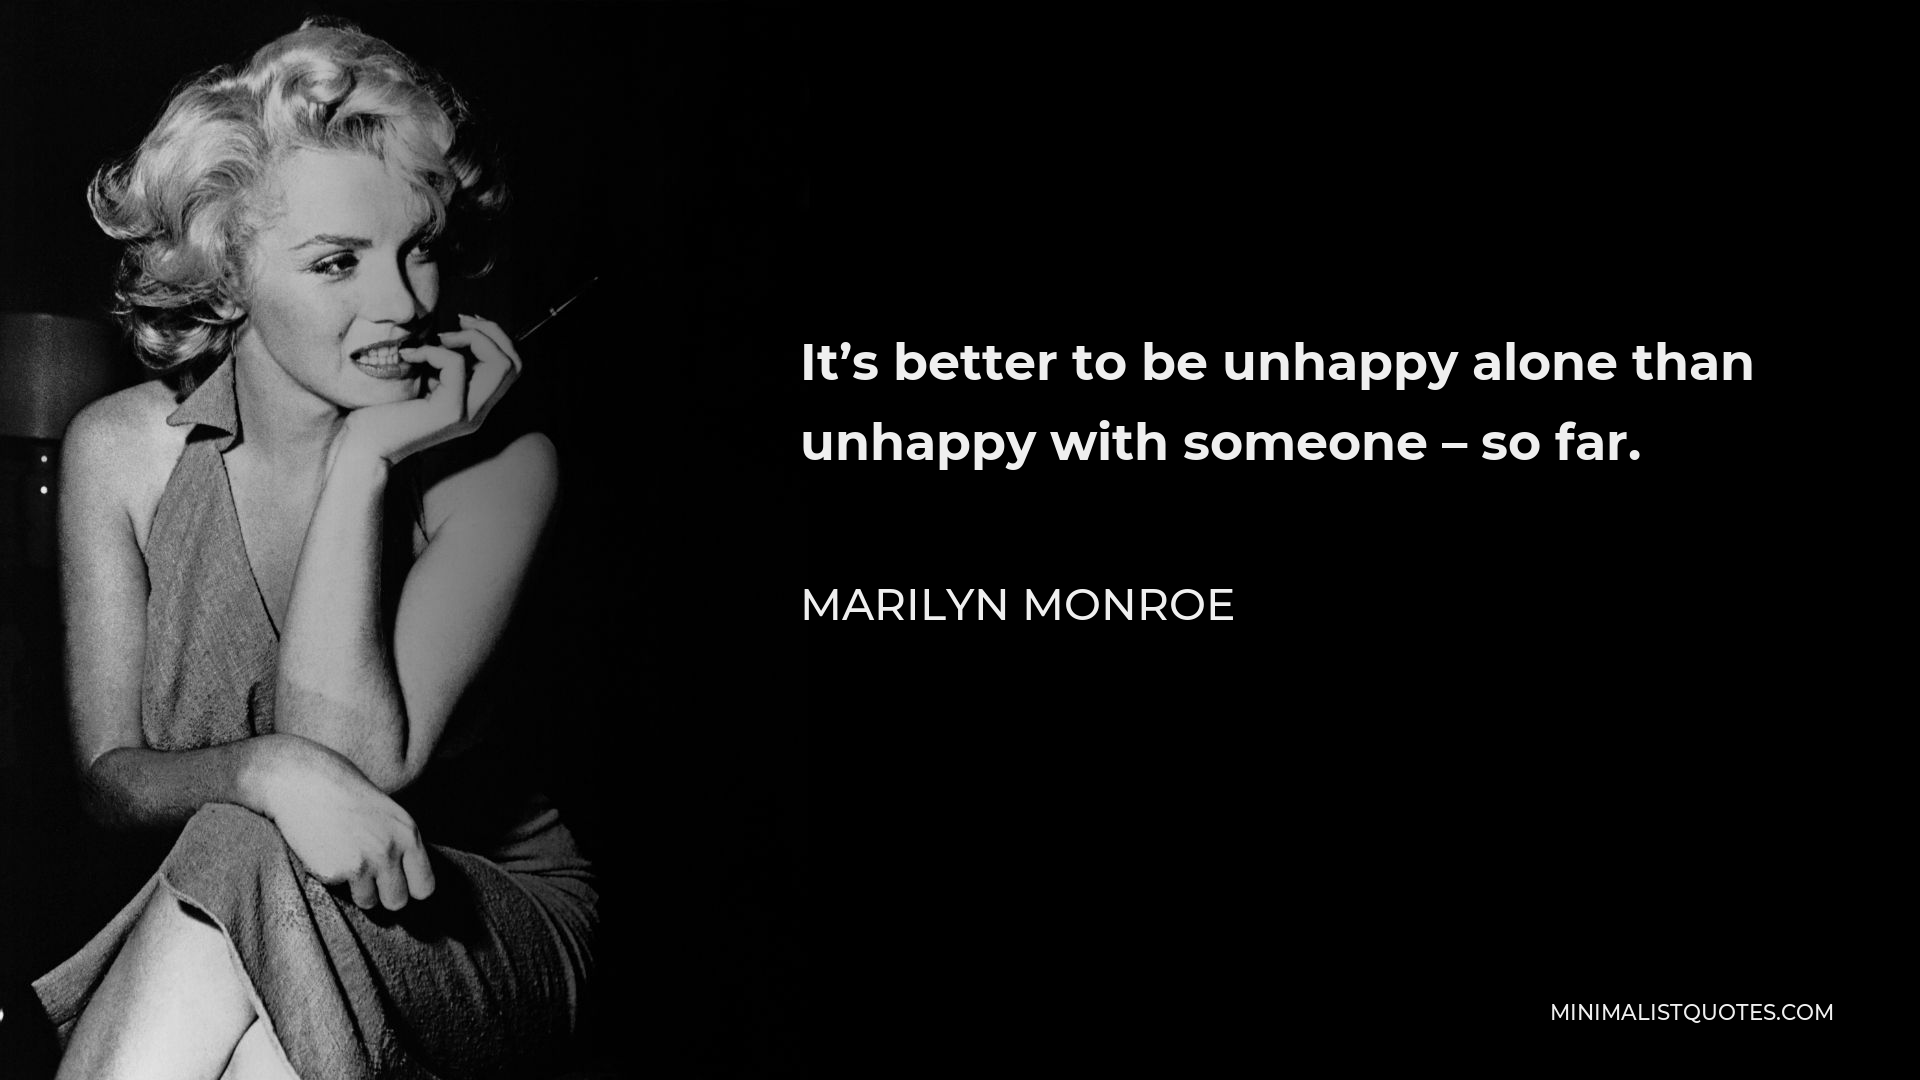 Marilyn Monroe Quote - It’s better to be unhappy alone than unhappy with someone – so far.